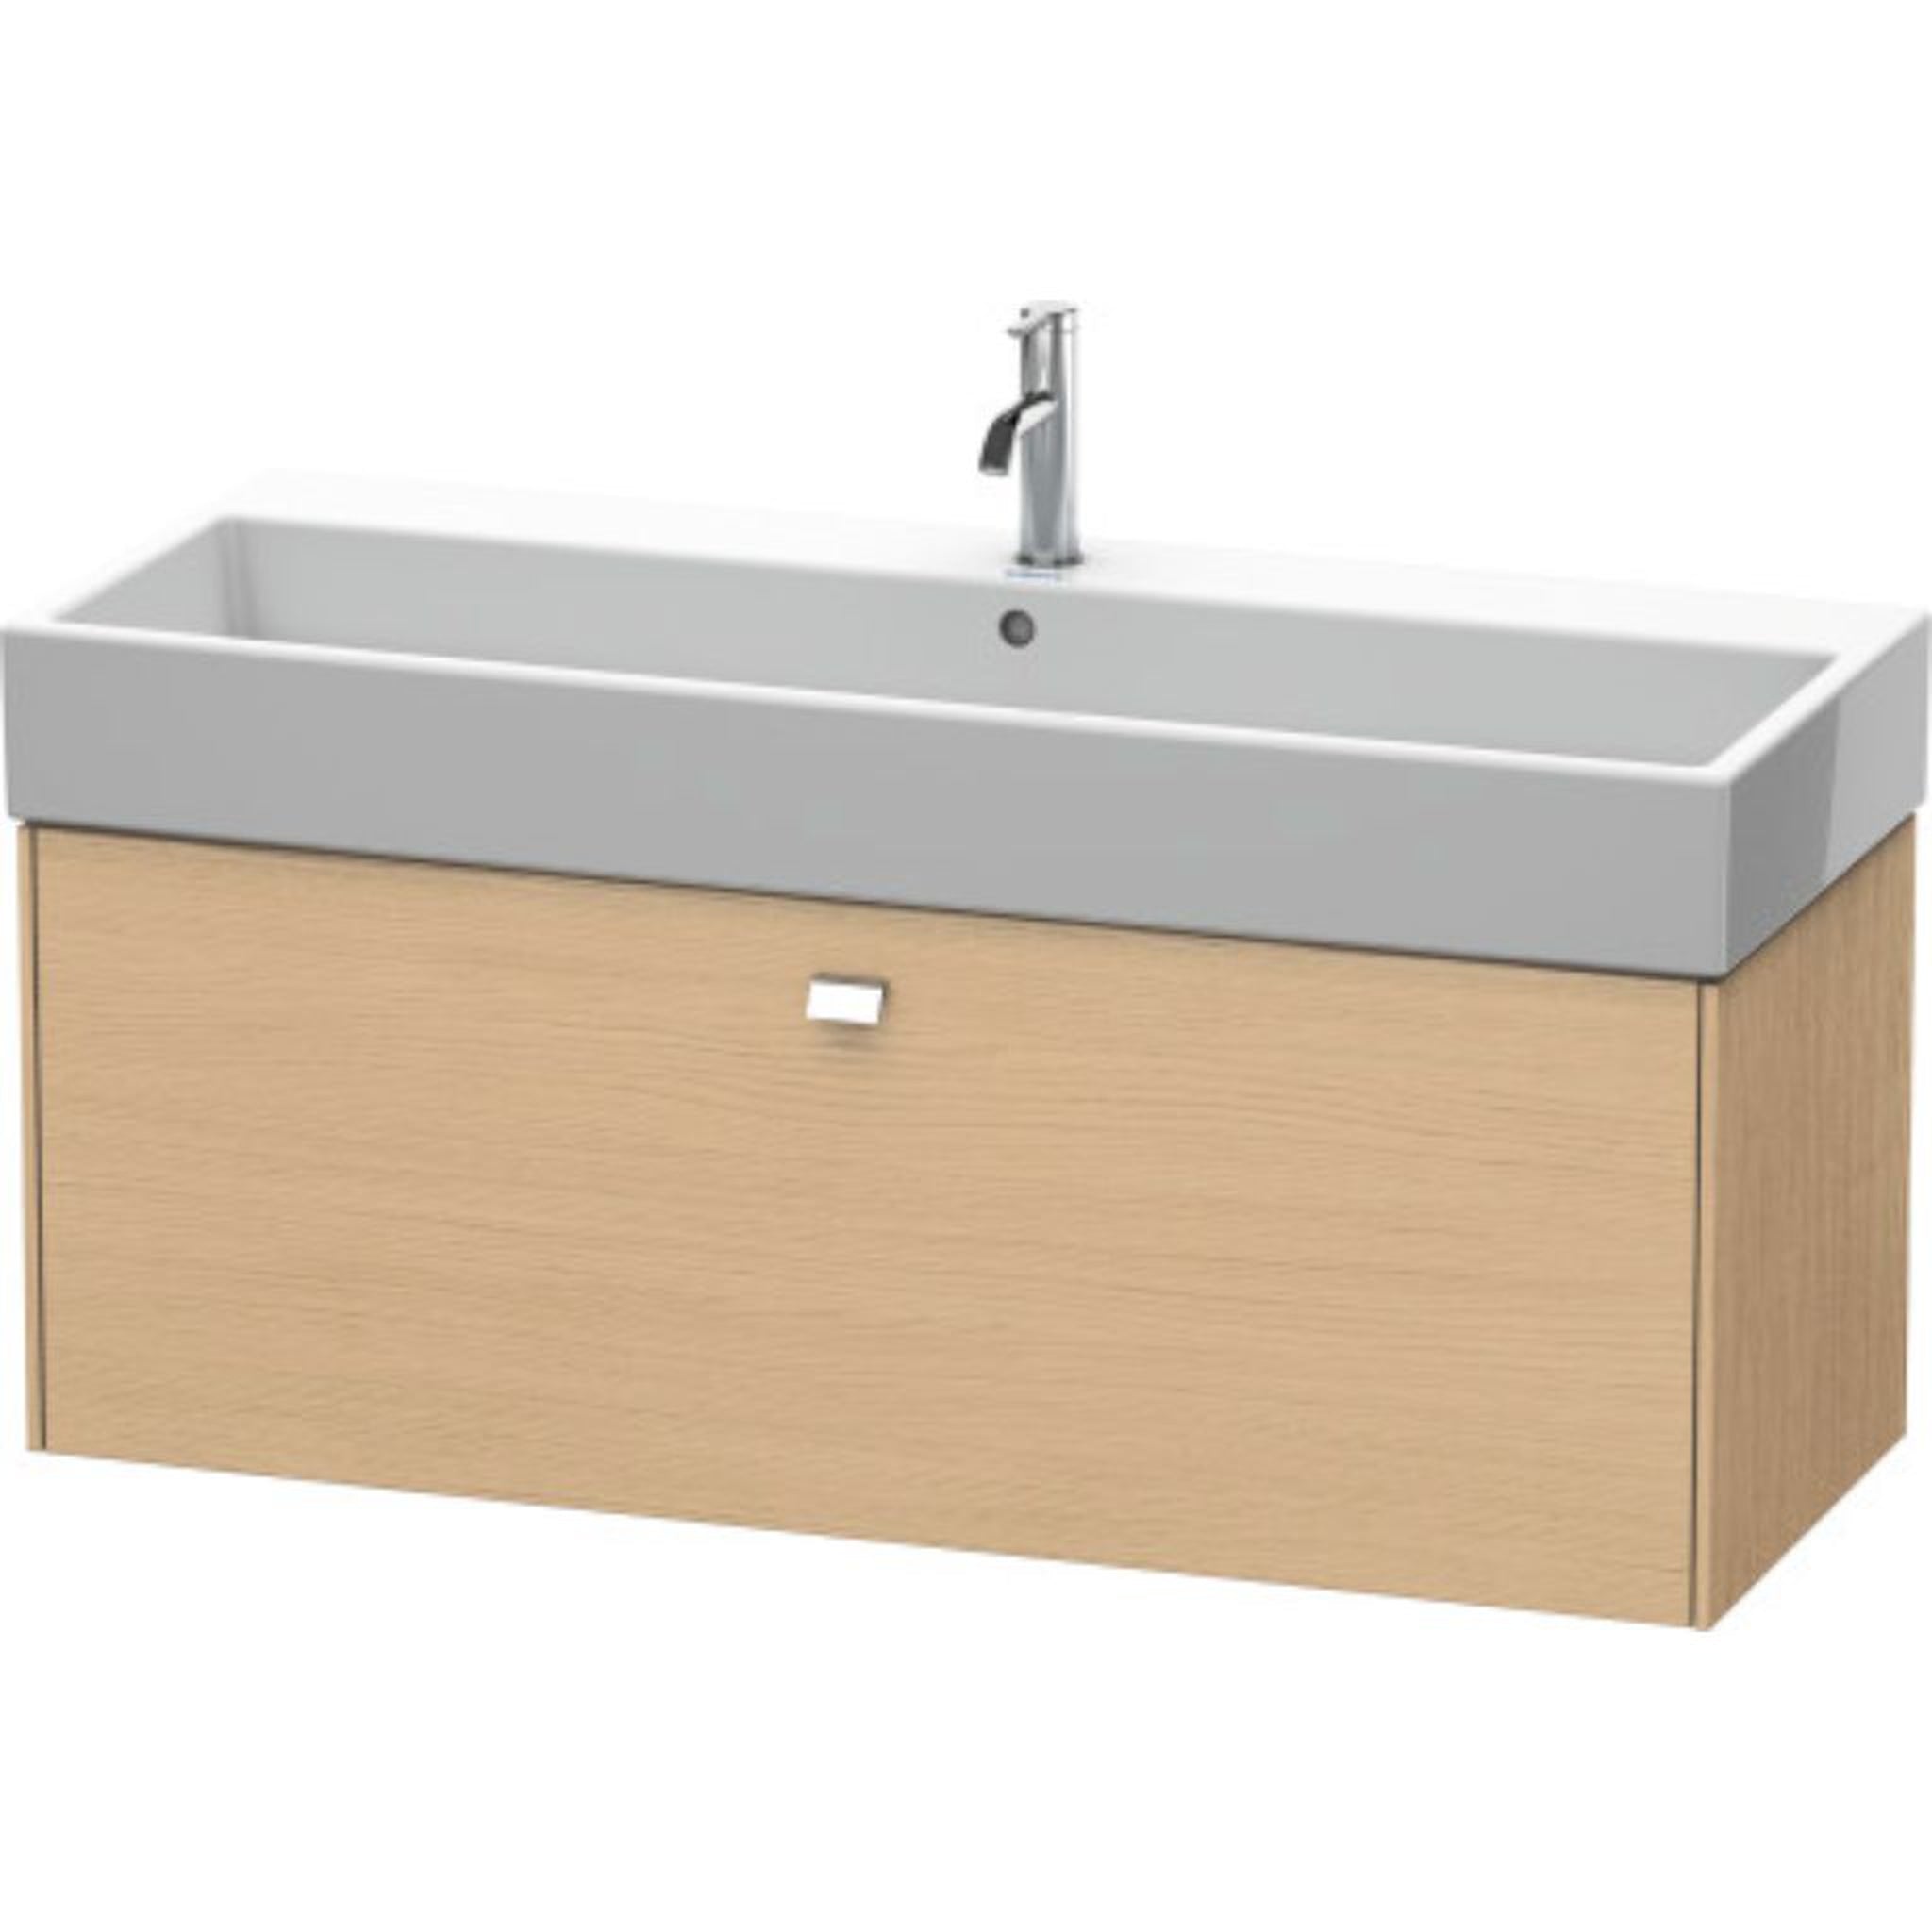 Duravit, Duravit Brioso 47" x 17" x 18" One Drawer Wall-Mount Vanity Unit in Natural Oak and Chrome Handle